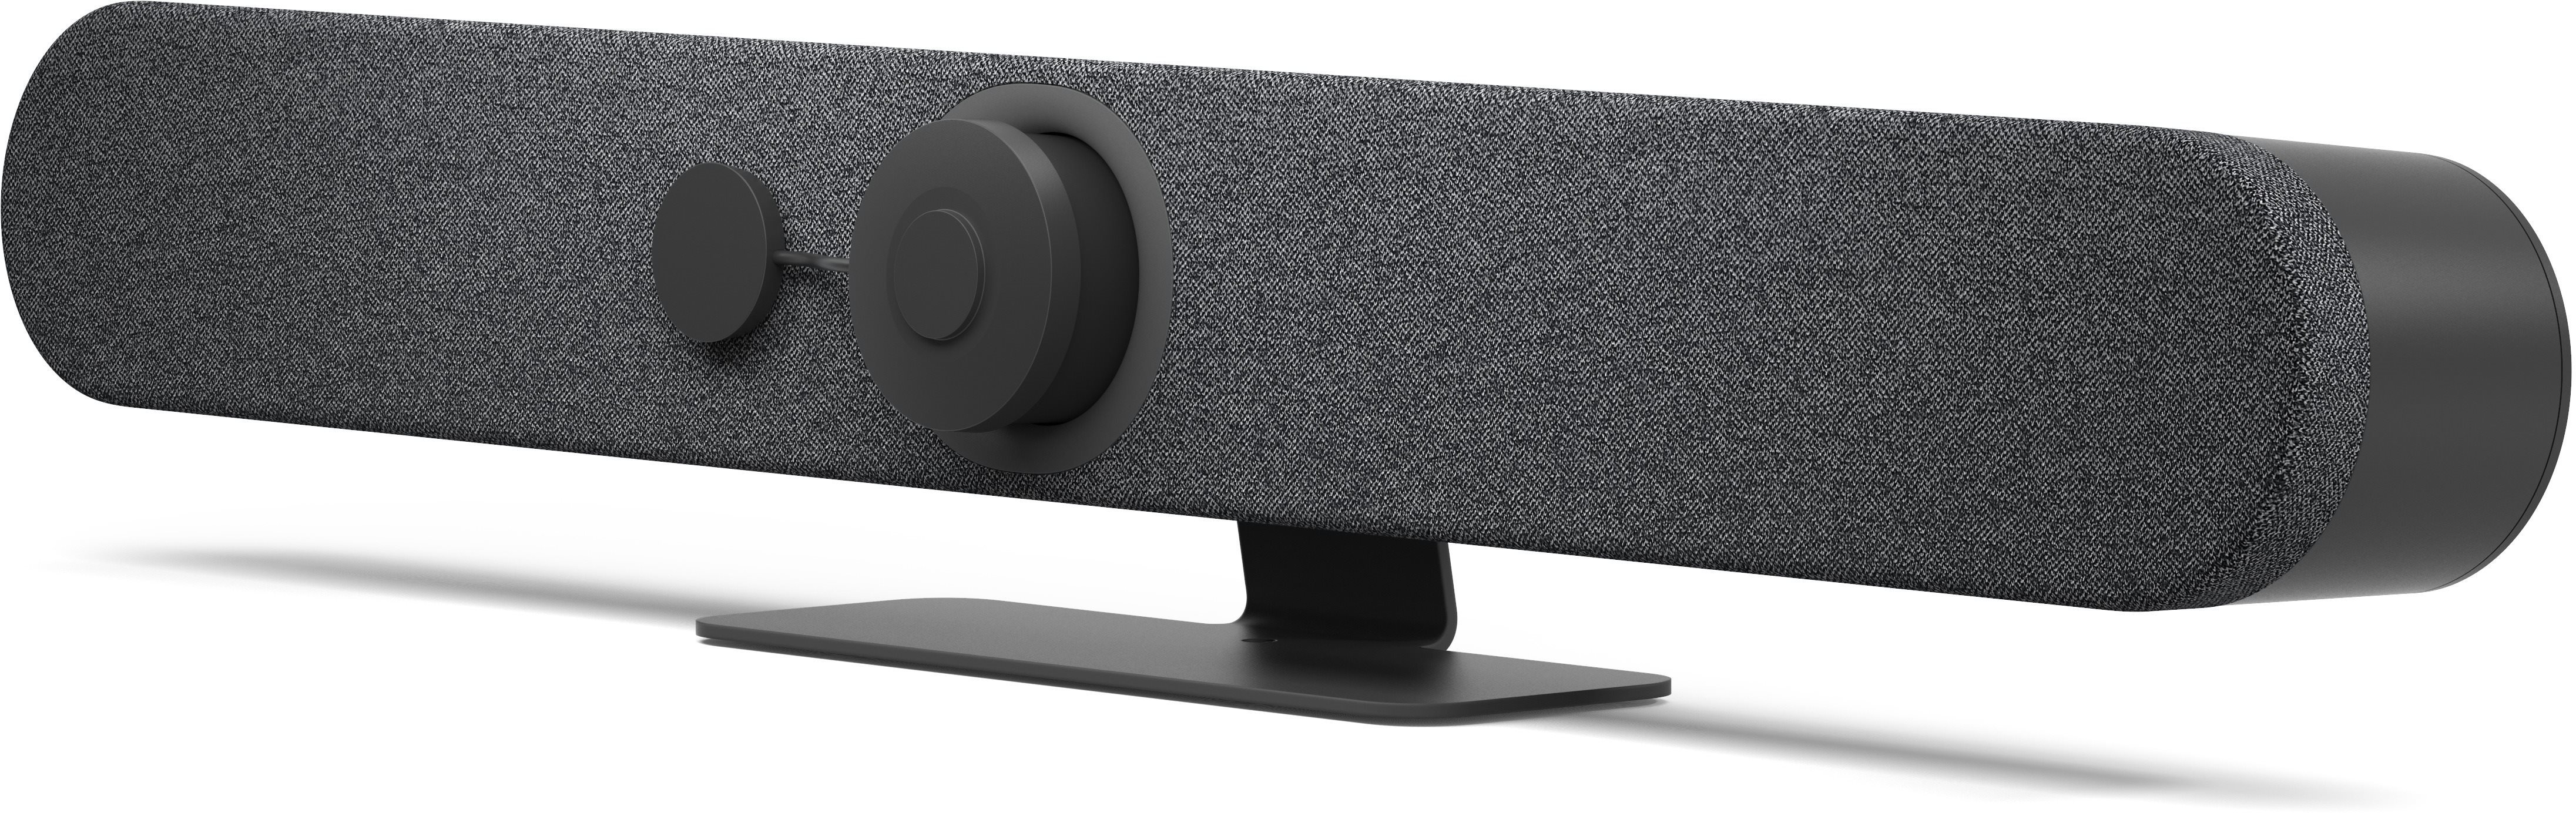 Webcam Logitech Rally Bar, Graphite Lateral view